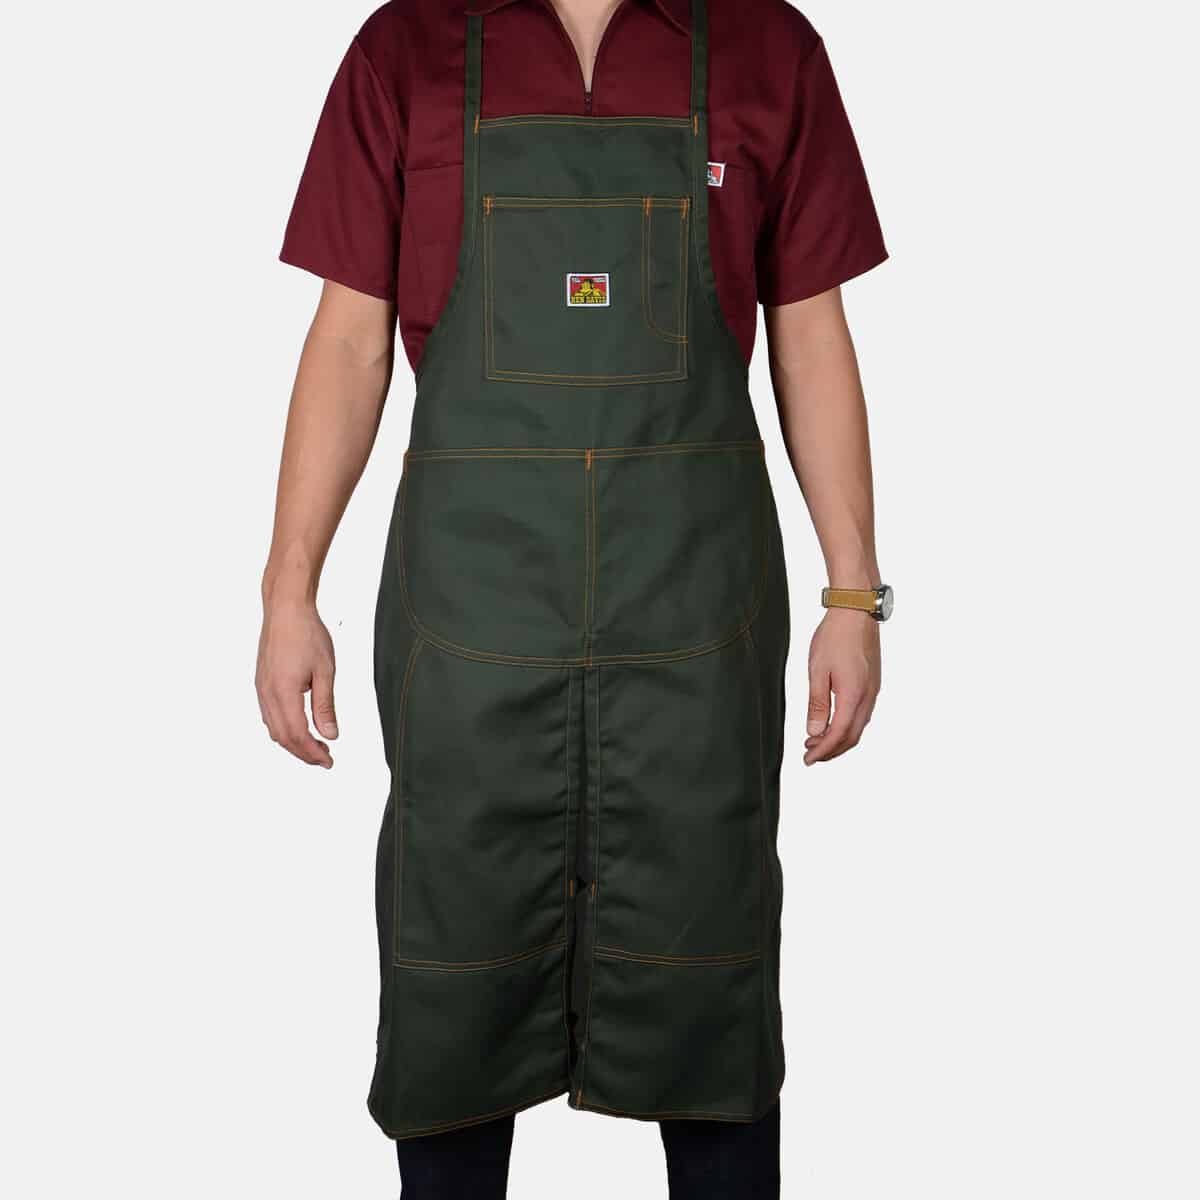 Worker's Utility Olive Teamster's Apron - One Size - basicsclothing